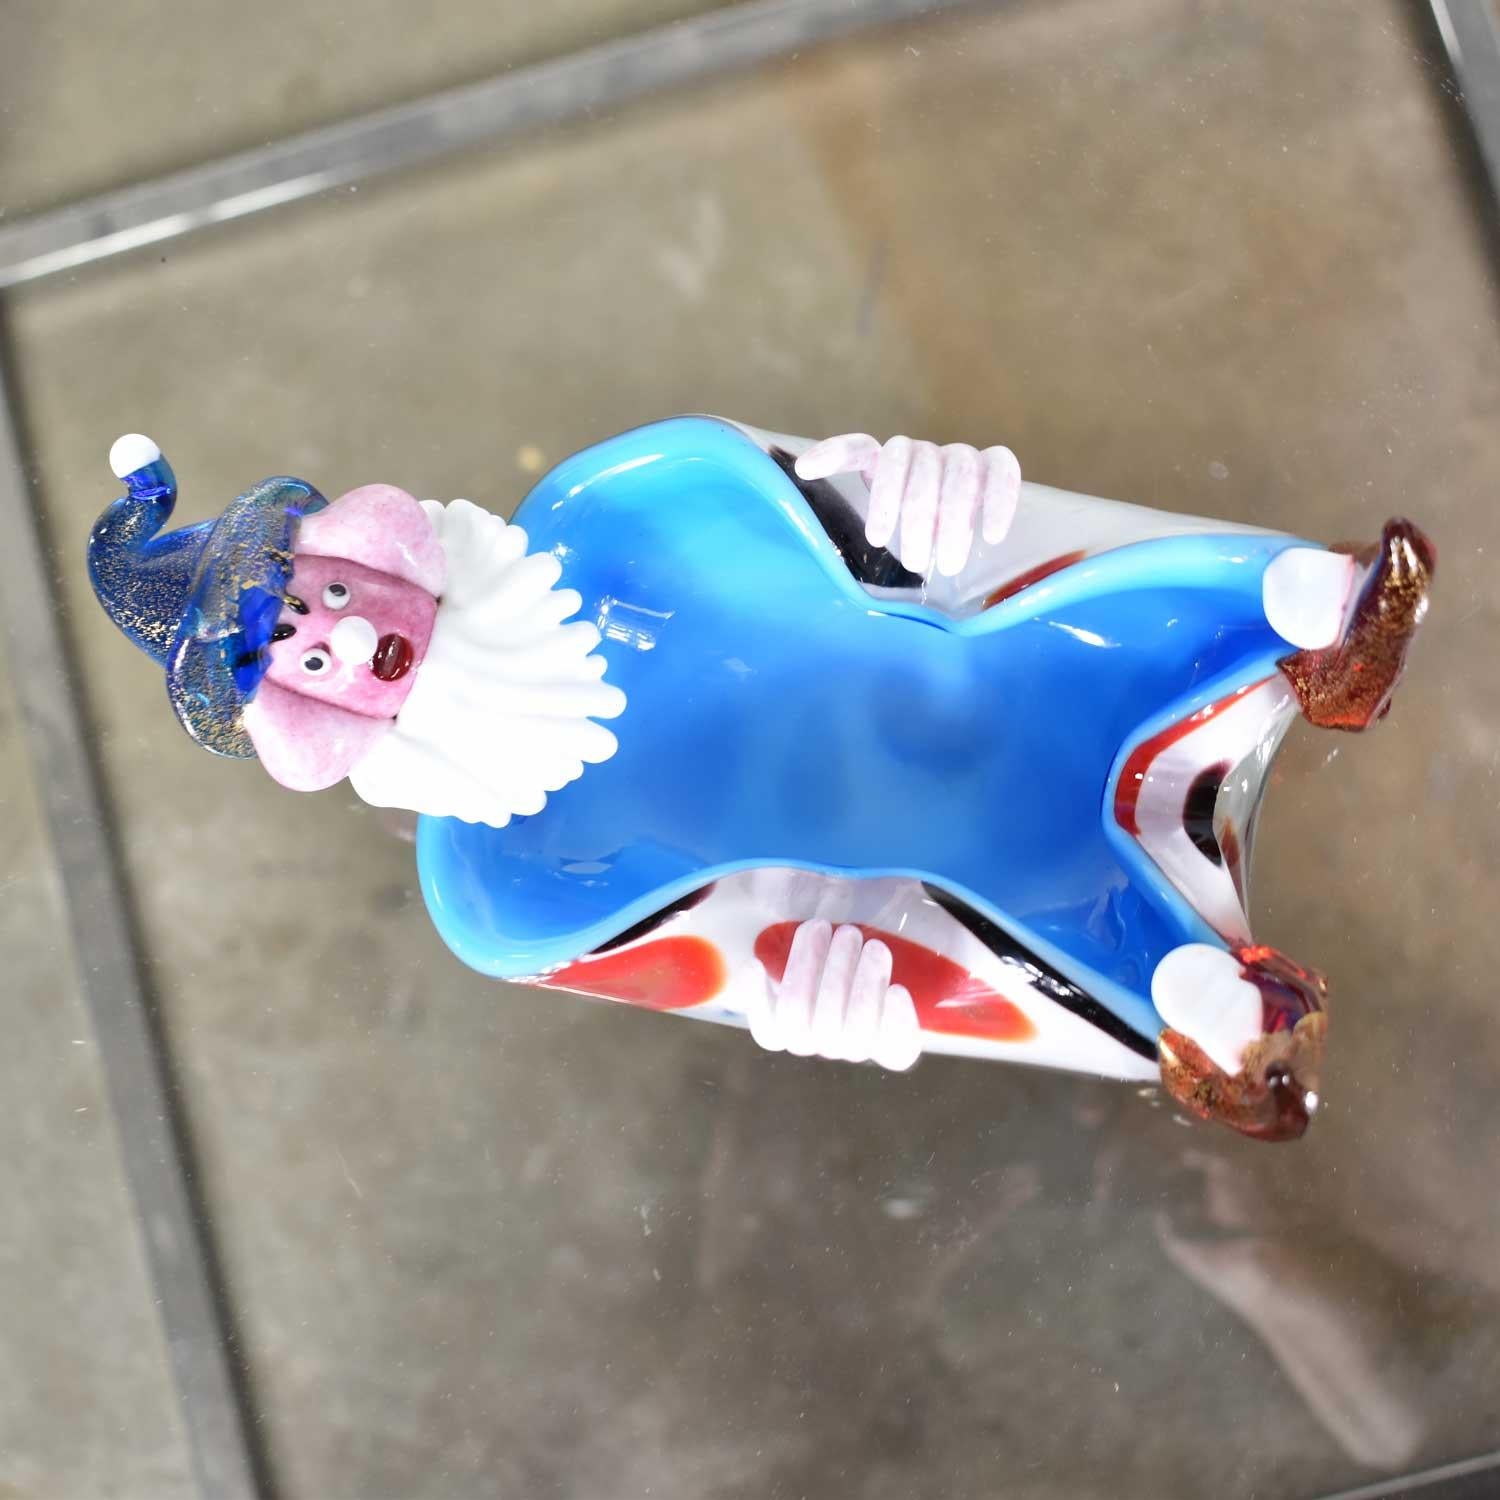 Awesome example of Mid-Century Modern vintage Murano Venetian glass in this adorable clown dish. It is in excellent condition with no chips, cracks, or chiggers. It does have a very worn maker’s sticker on its bottom that is not readable. There are